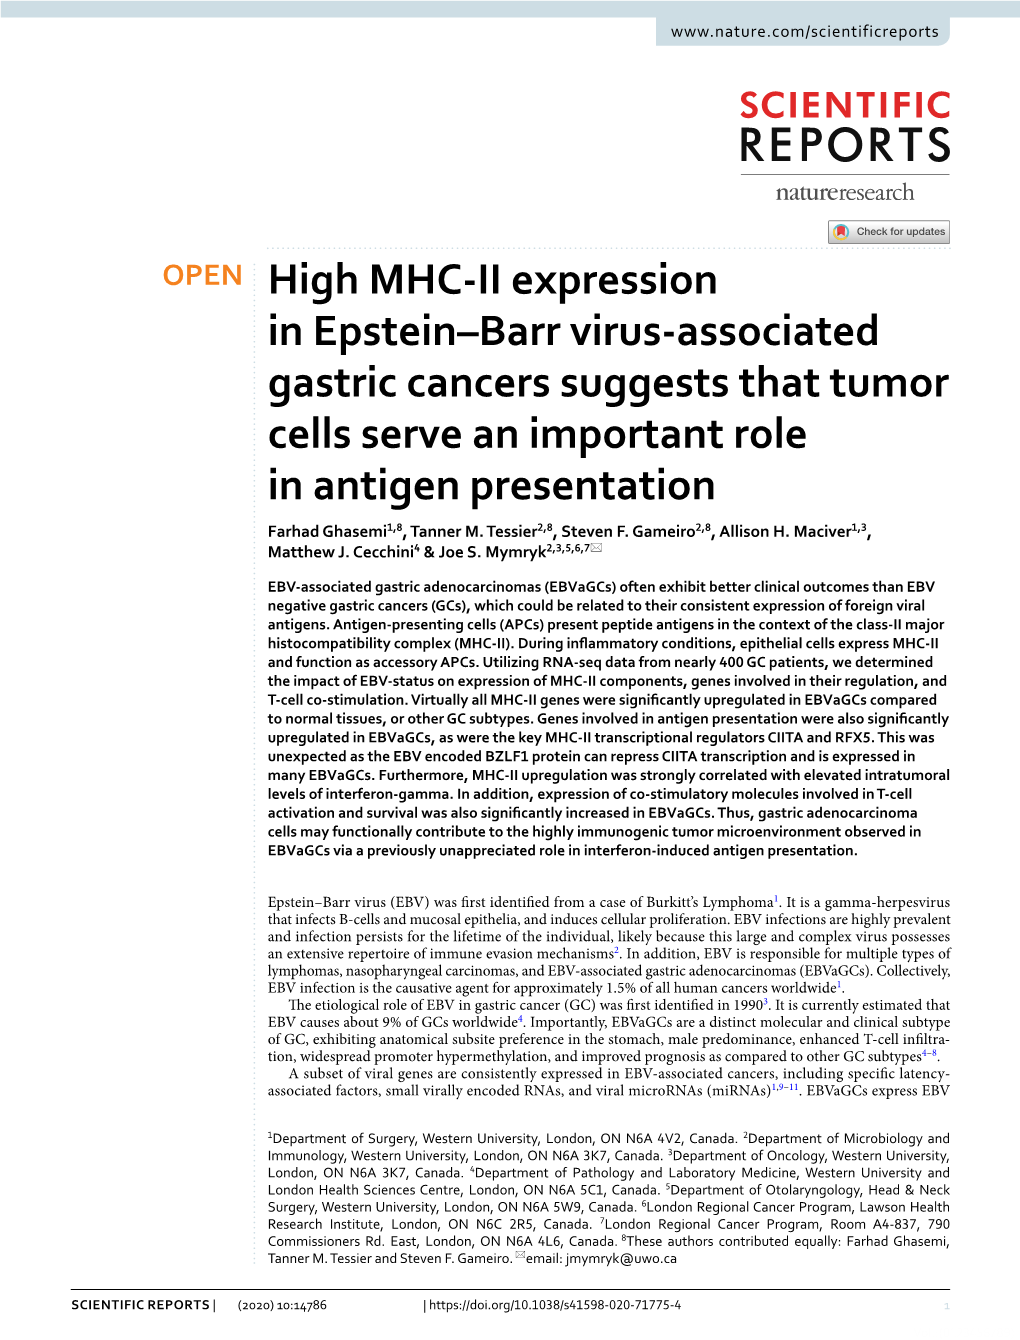 High MHC-II Expression in Epstein–Barr Virus-Associated Gastric